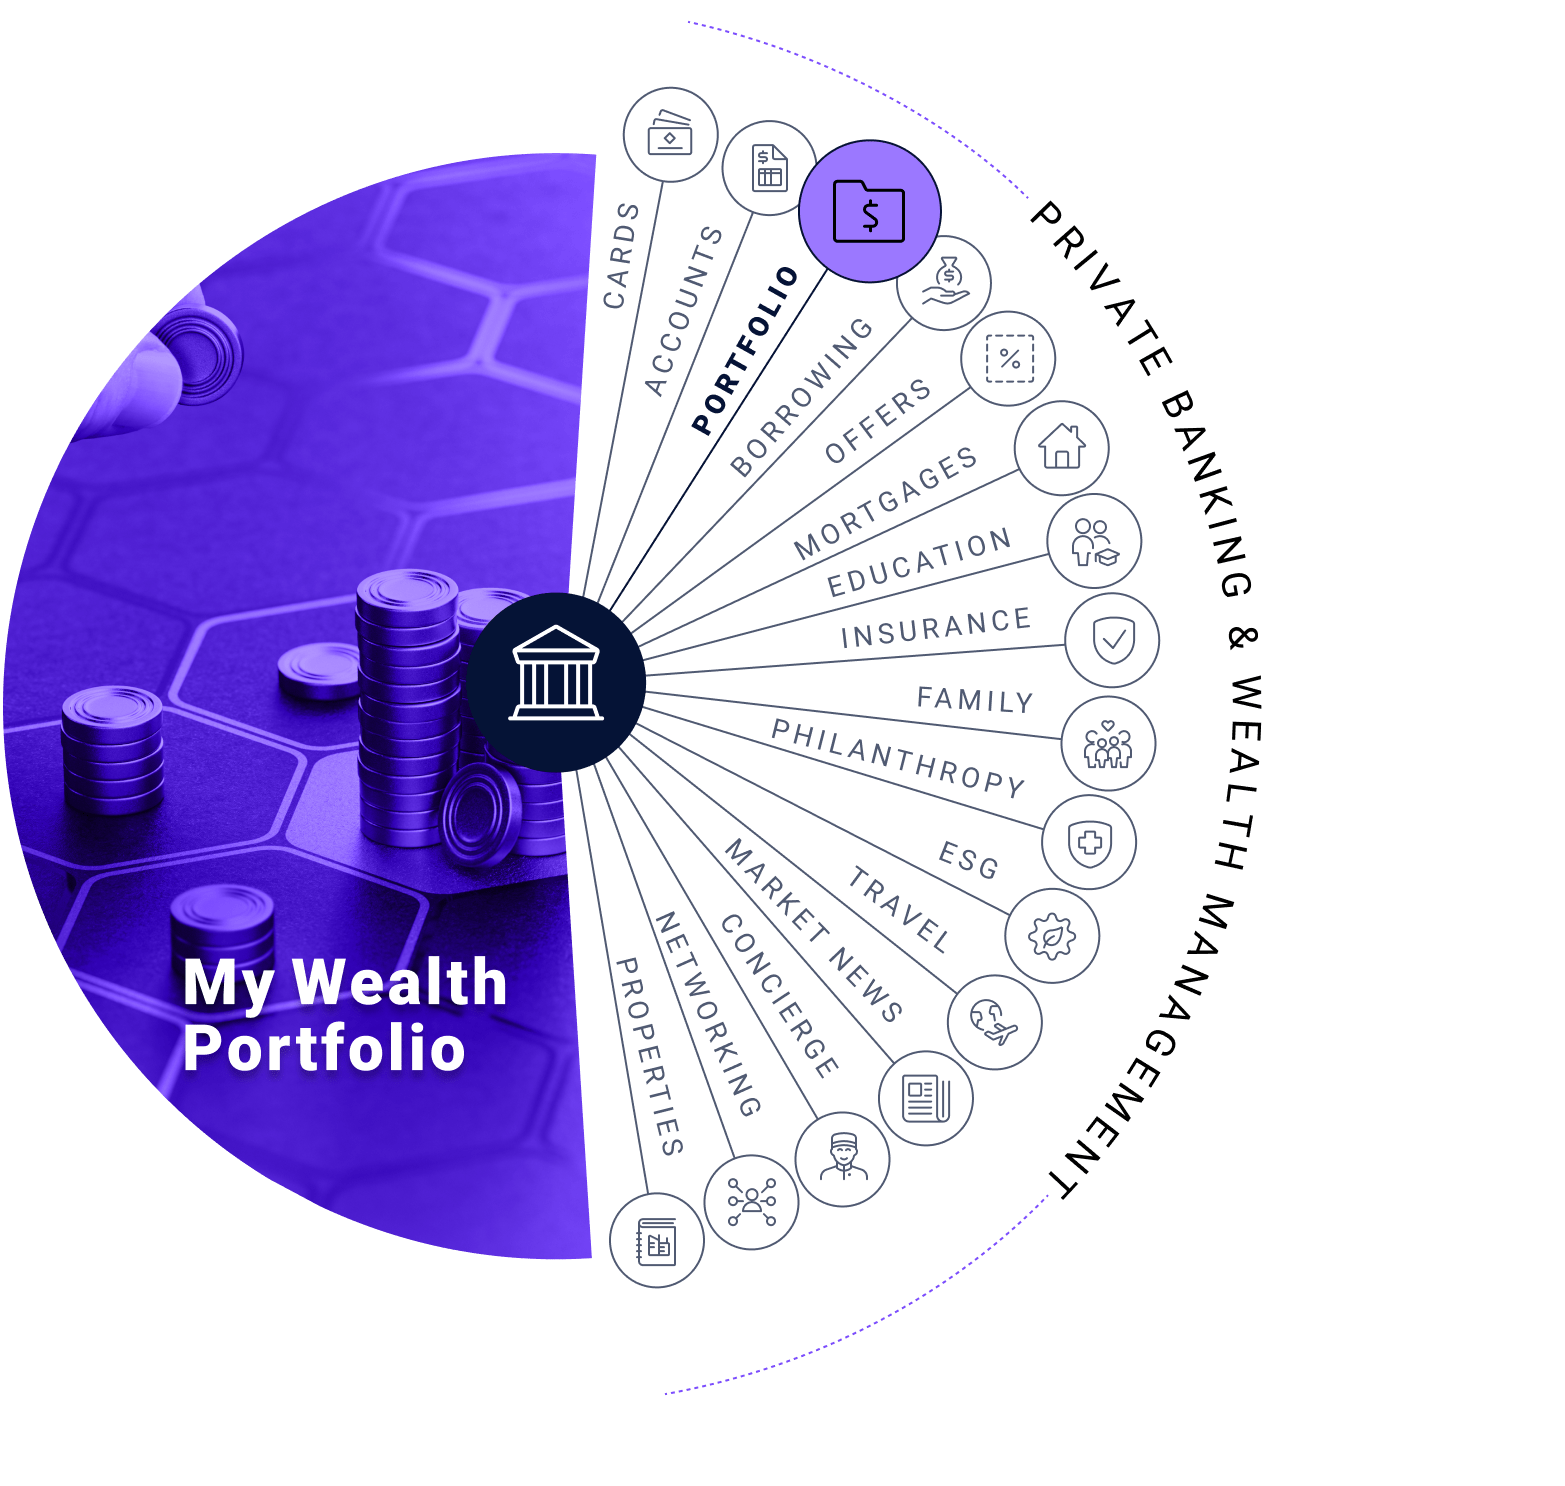 My Wealth porfolio: cards, accounts, portfolio, borrowing, offers, mortgages, education, insurance, family, philanthropy, esg, travel, market news, concierge, networking, and properties